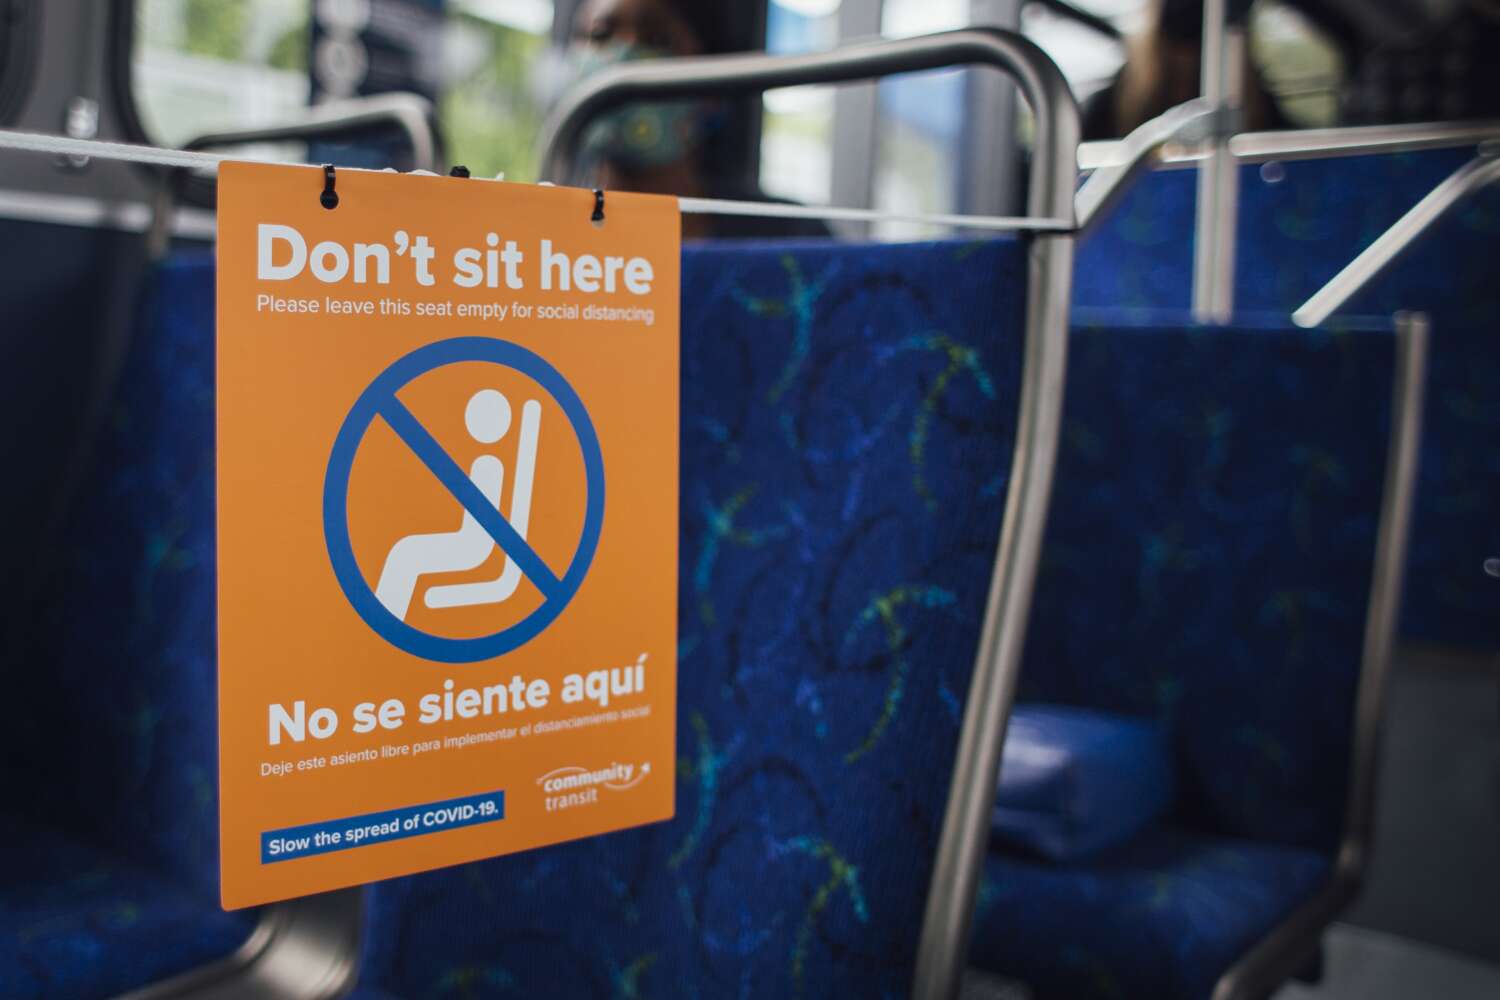 Do not sit here sign on Community Transit bus